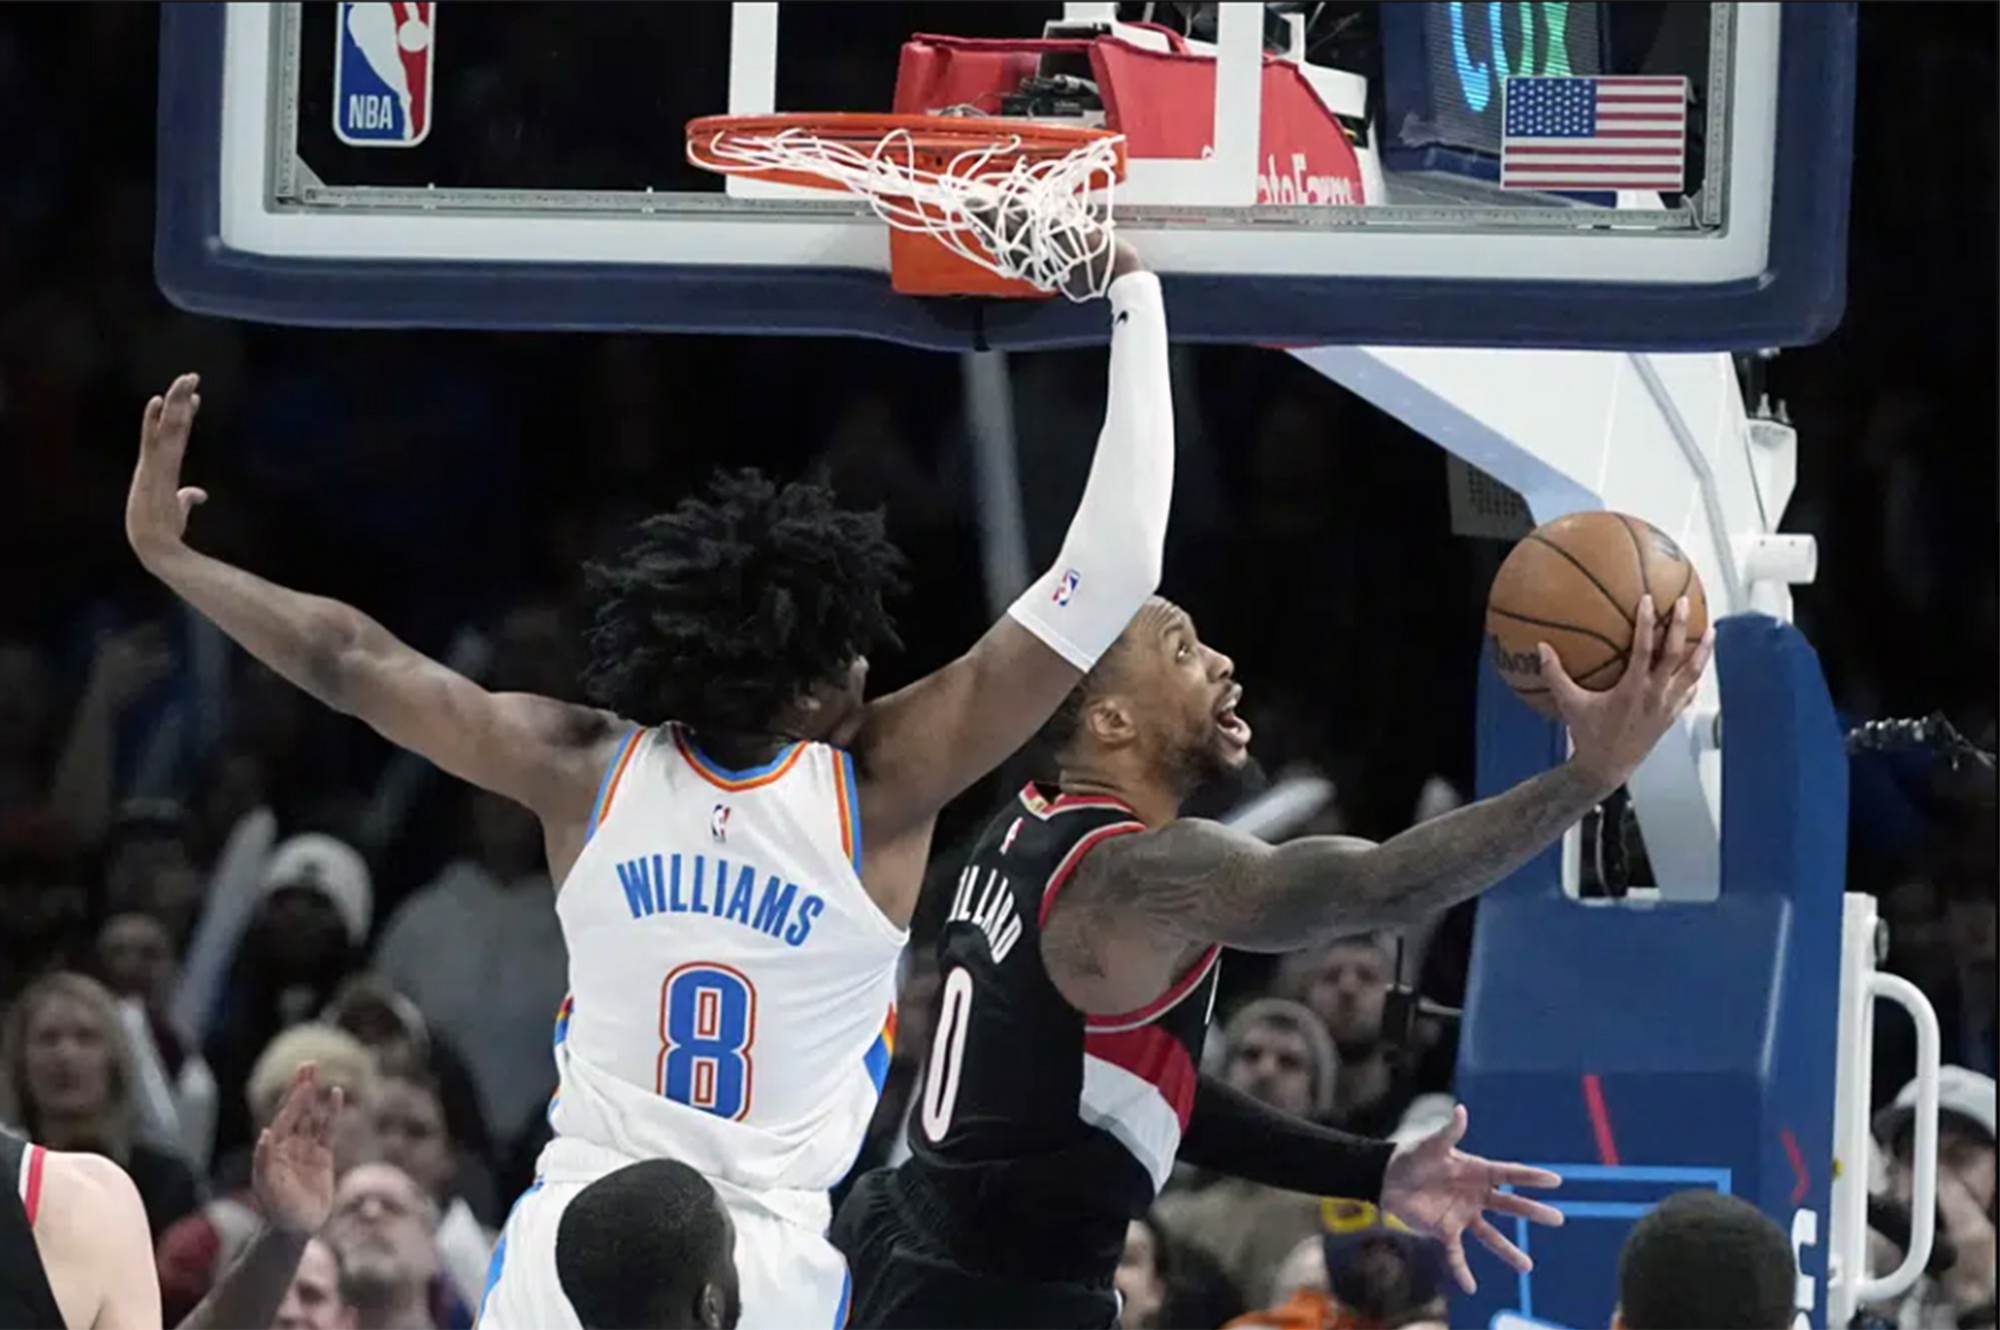 Portland Trail Blazers guard Damian Lillard (0) shoots in front of Oklahoma City Thunder forward Jalen Williams (8) in the second half of an NBA basketball game Monday, Dec. 19, 2022, in Oklahoma City.